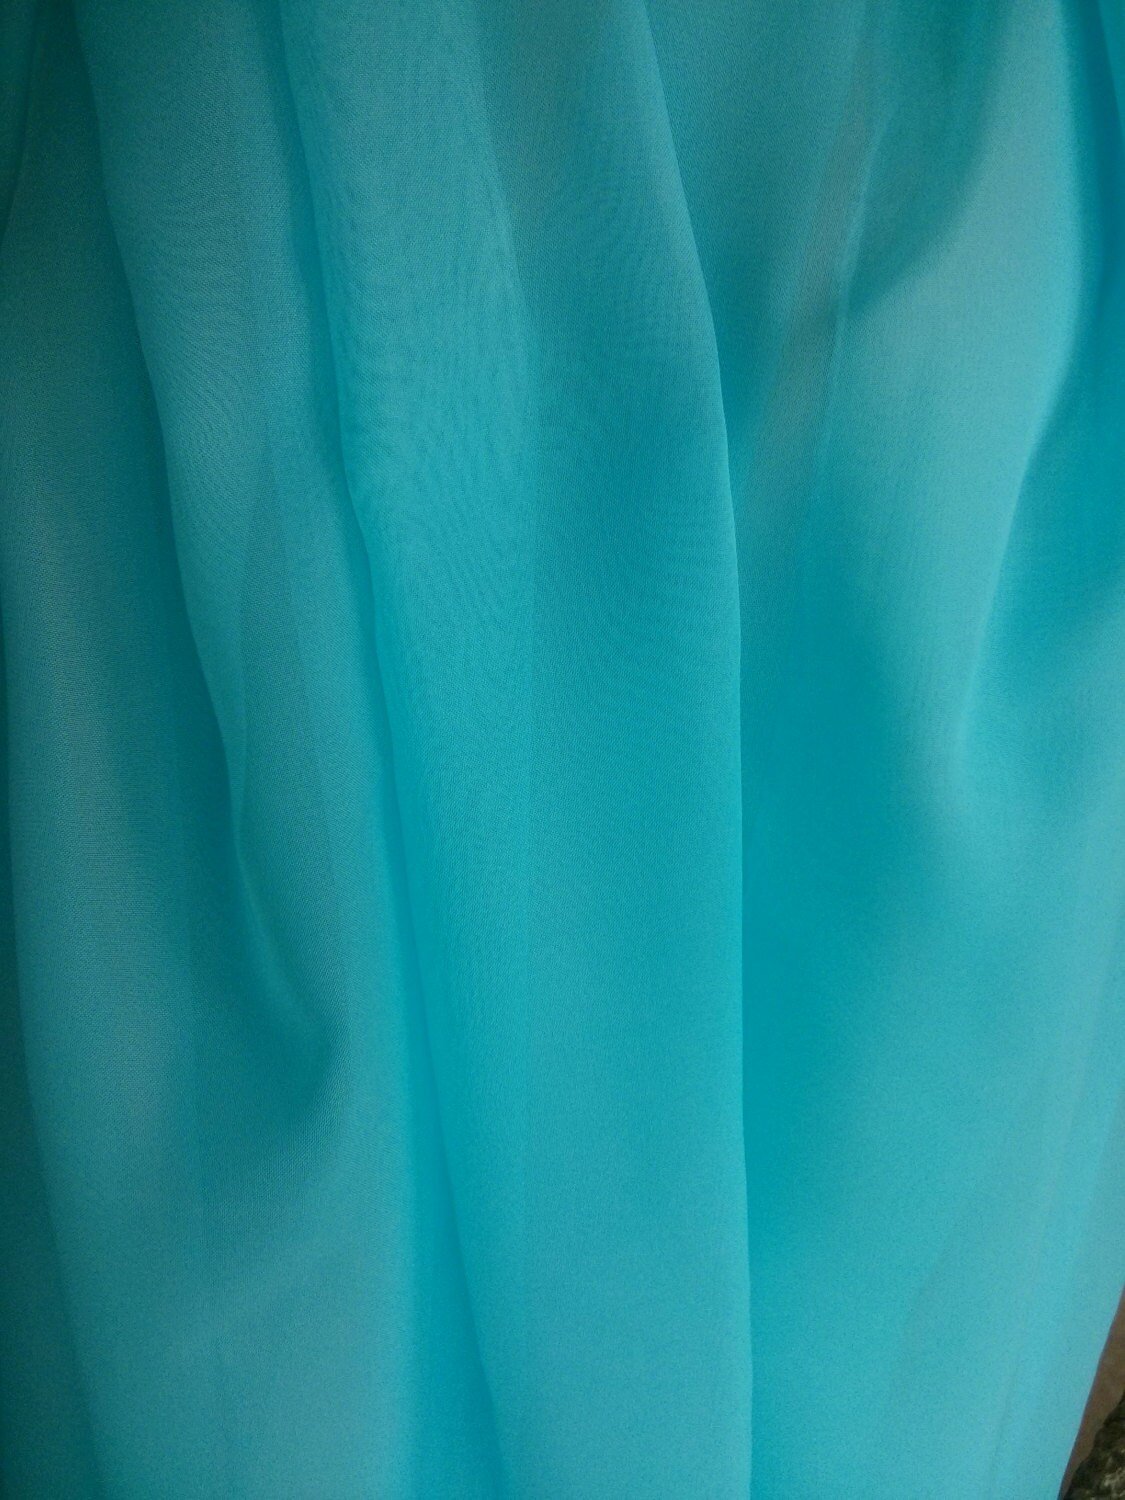 Turquoise Wedding Drapes 6 to 25 Ft Long X 114 In.free | Etsy